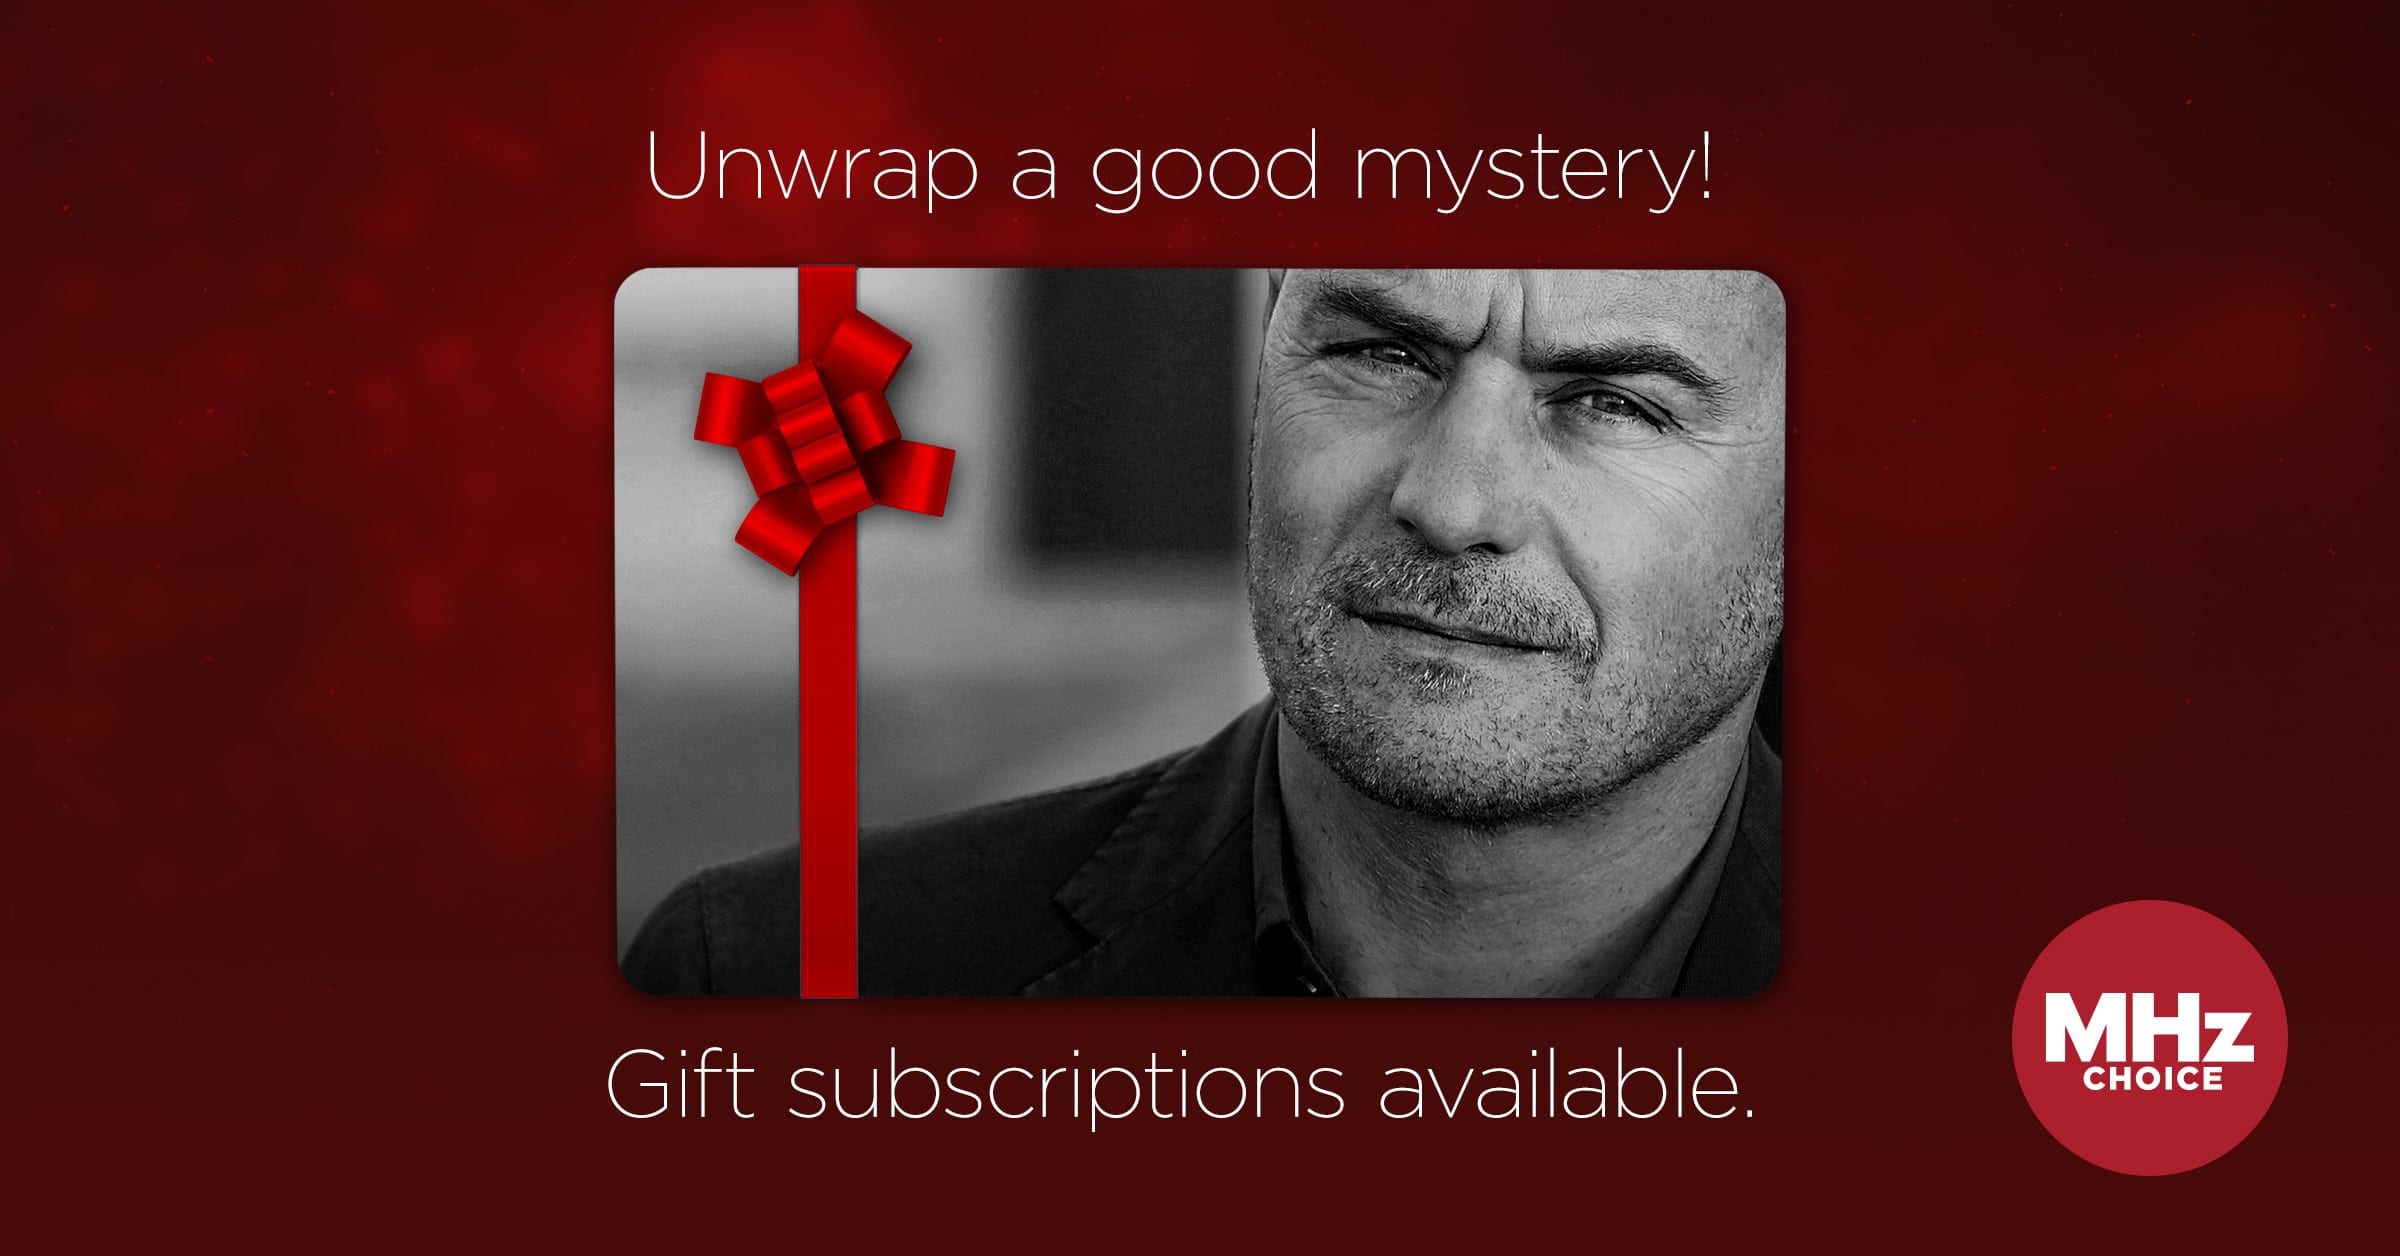 fb paid ad gift subscriptions unwrap a good mystery